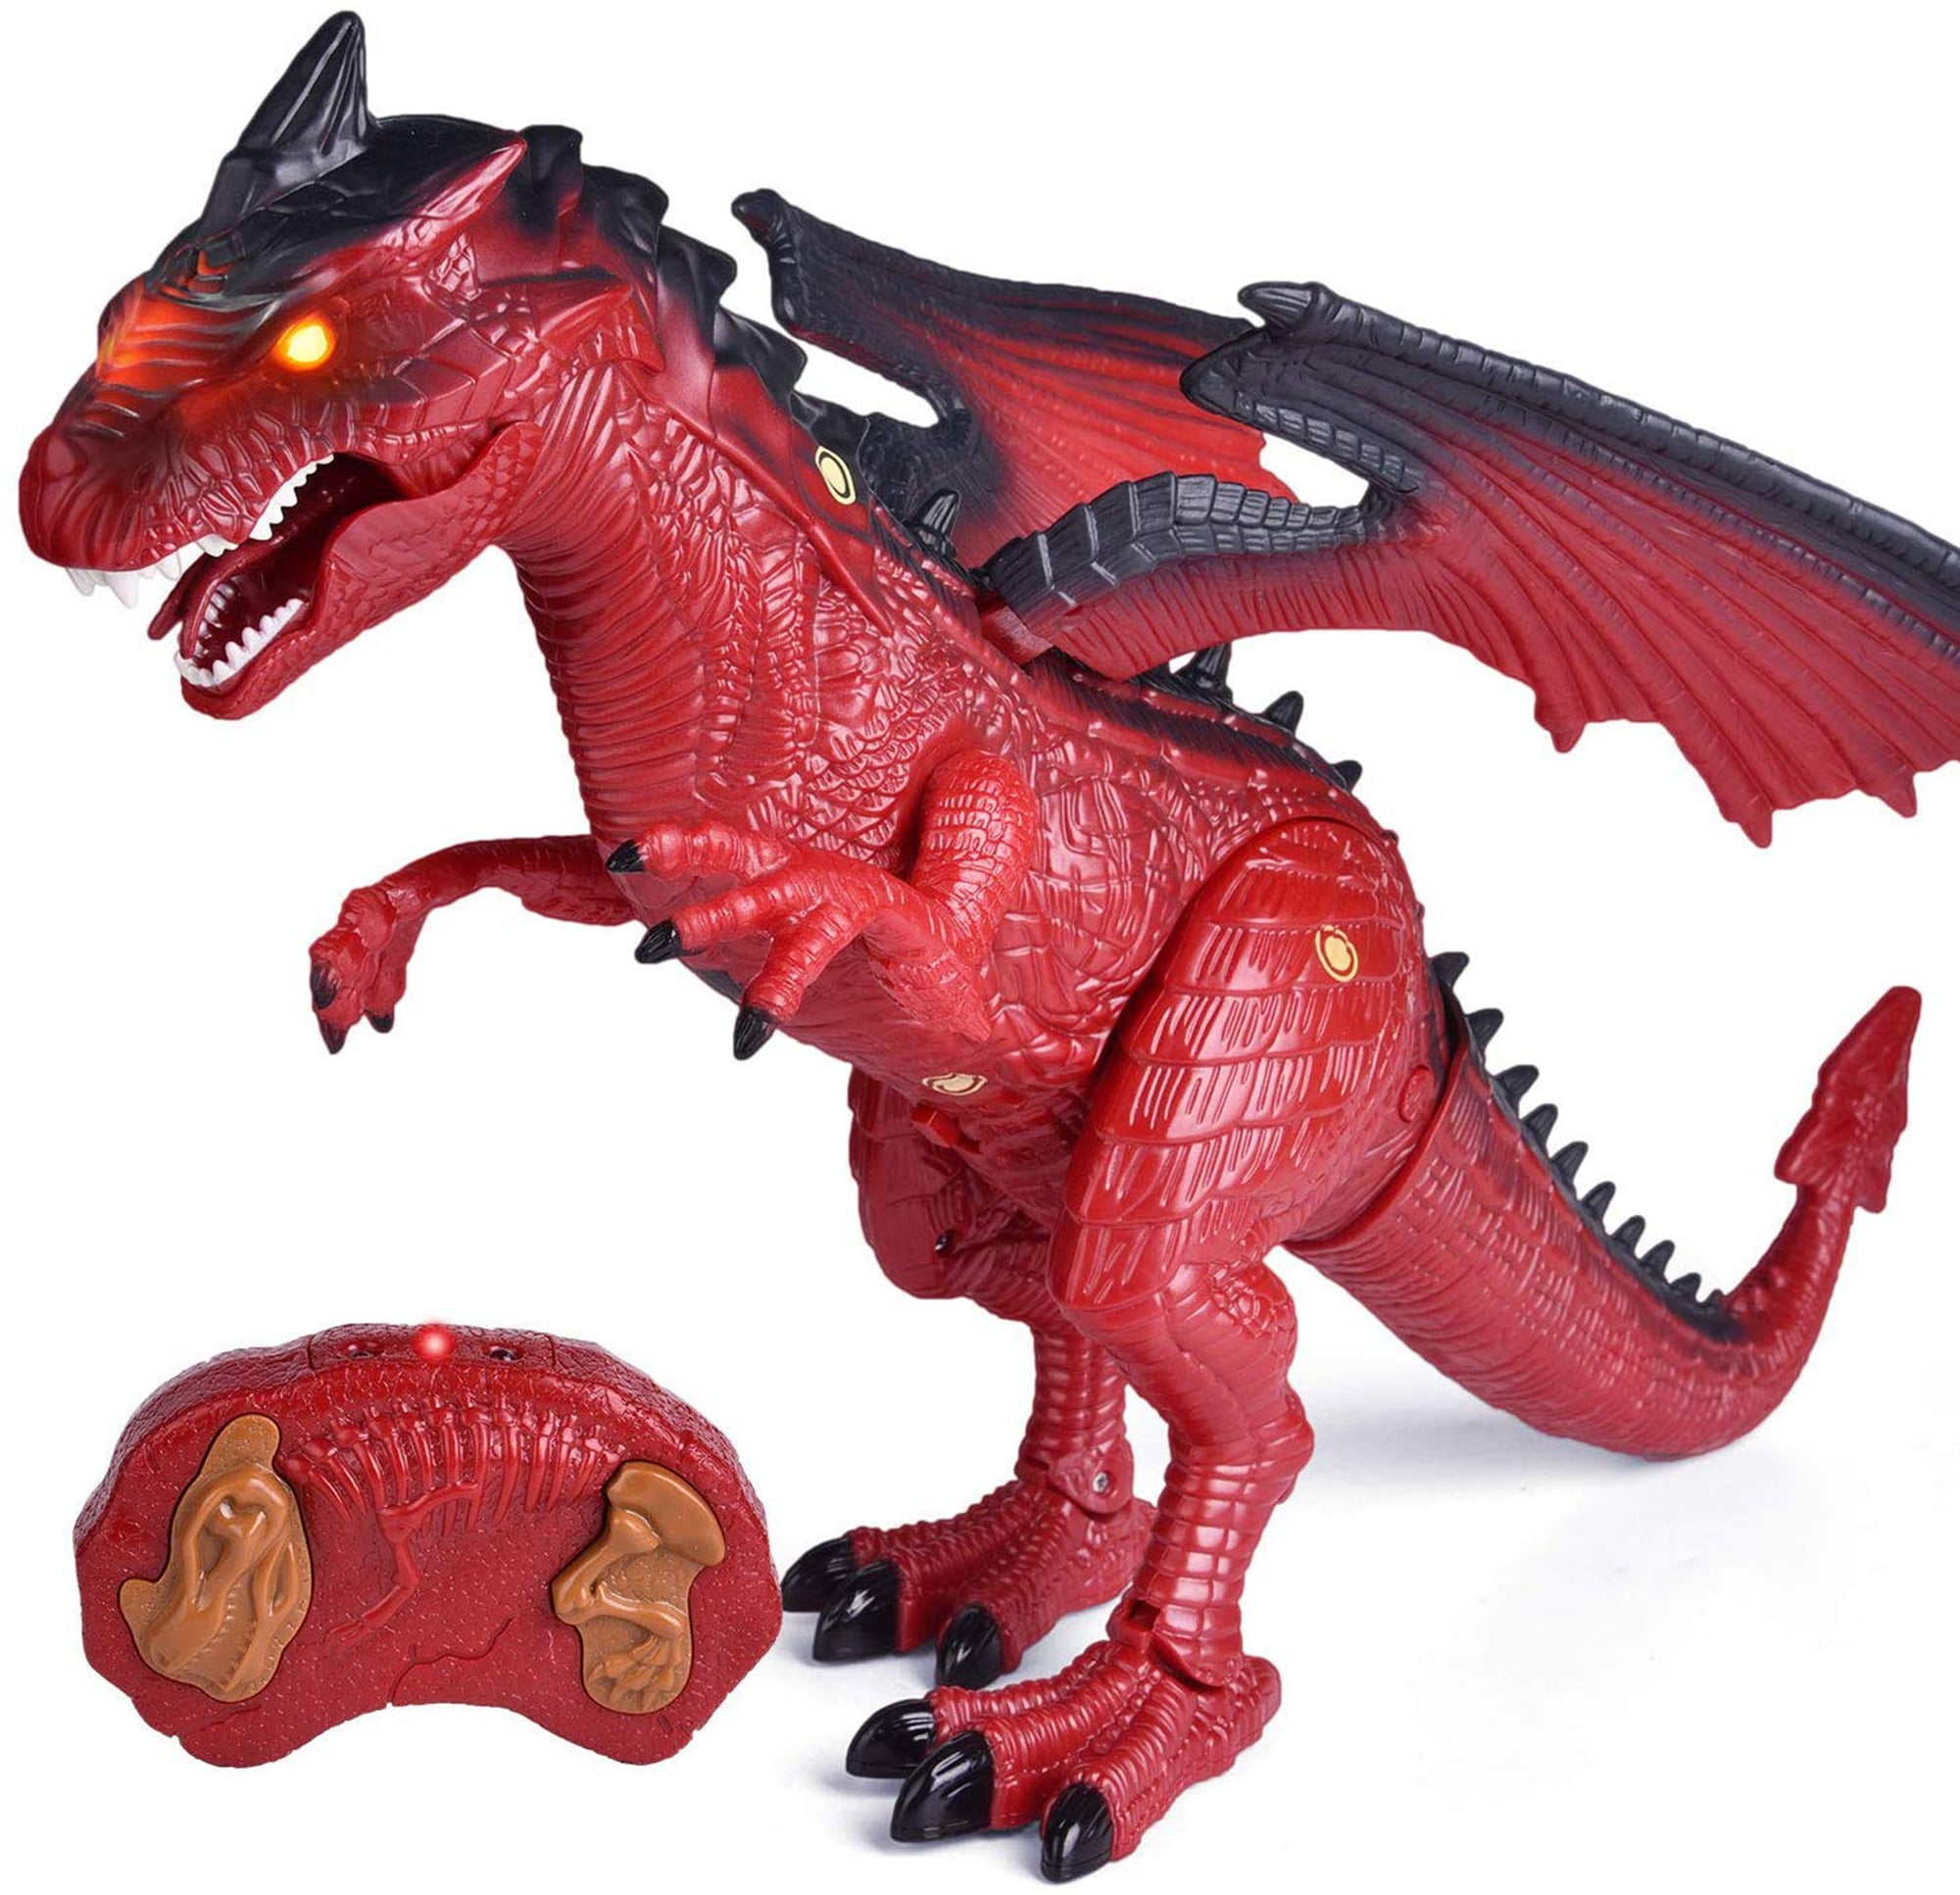 Remote Control Dinosaur Toys, Electronic Walking & Touch RC Dragon Toy